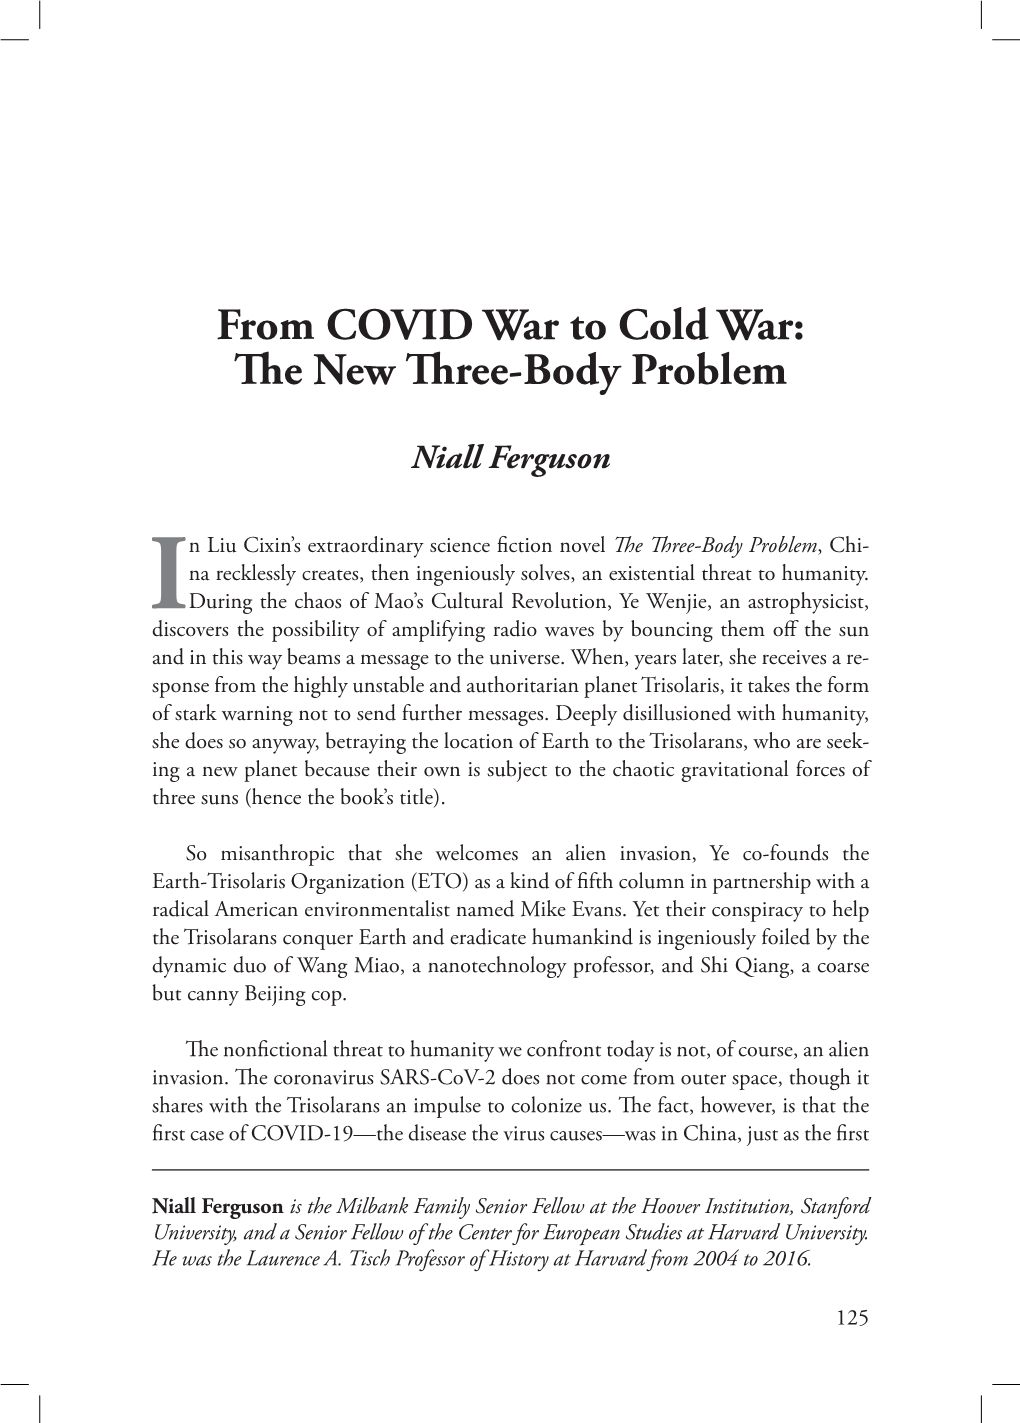 From COVID War to Cold War: the New Three-Body Problem